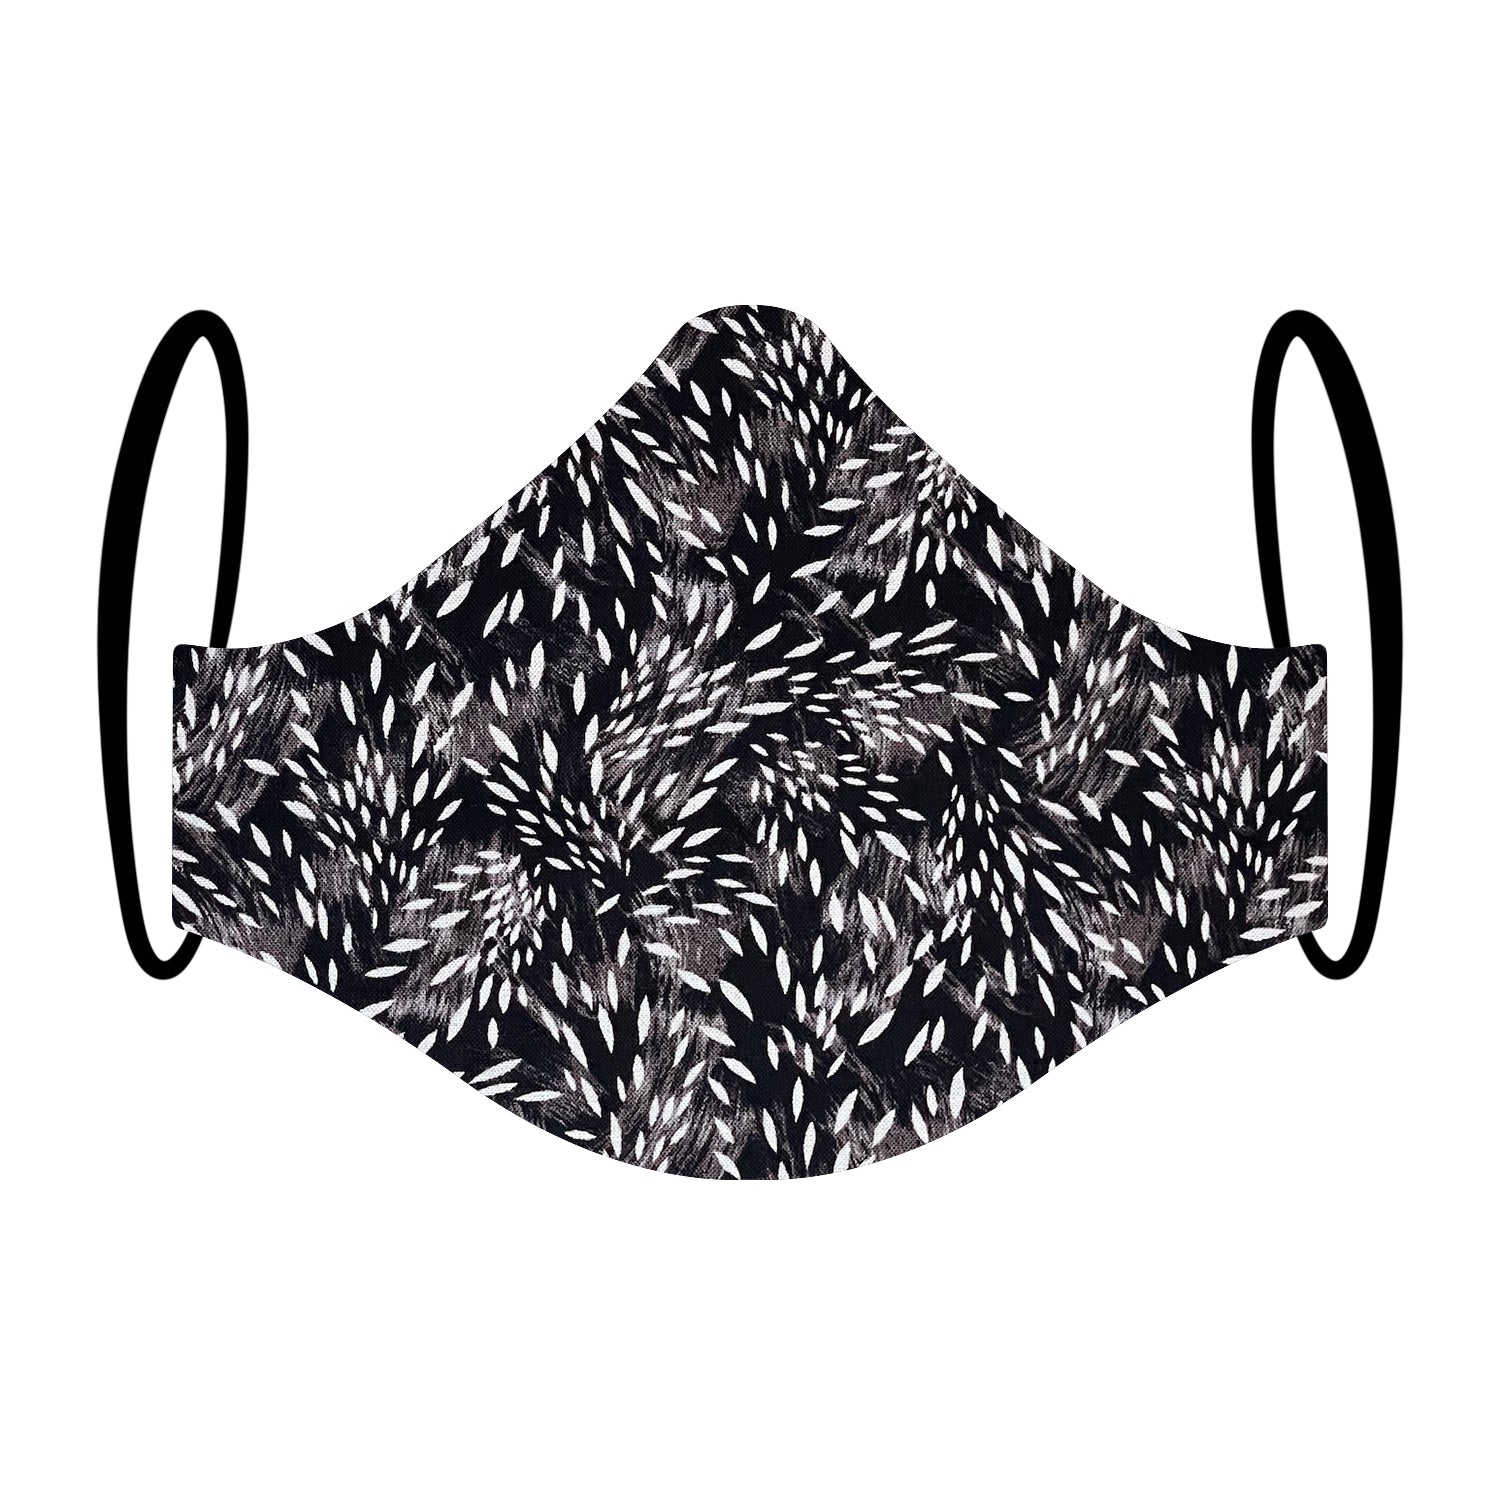 "Cheery Charcoal" Monochrome Leafy Print Triple-layer Washable Face Mask